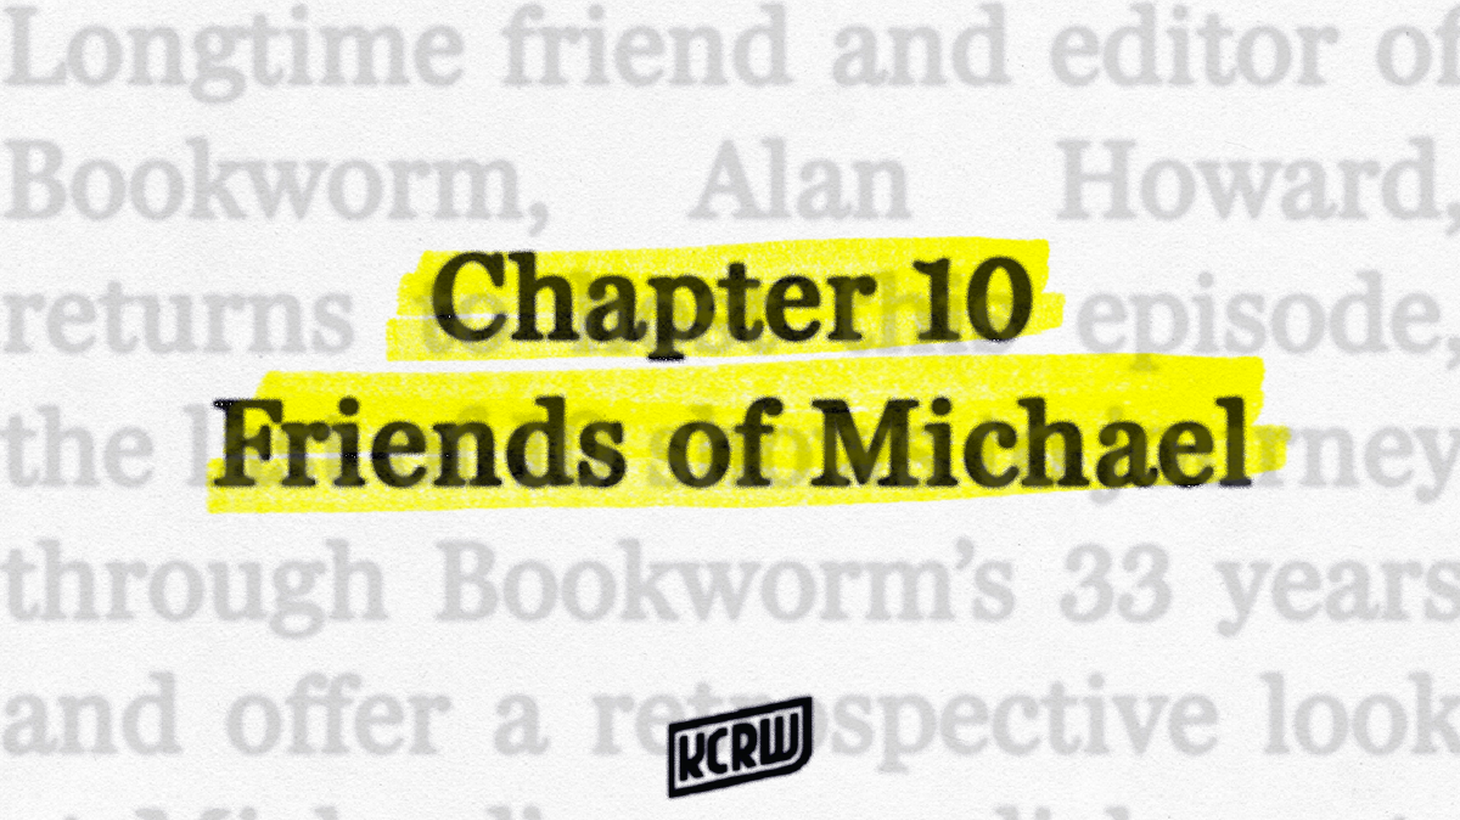 Longtime friend and editor of Bookworm, Alan Howard, returns to host this episode, the last of 10 shows to journey through Bookworm’s 33 years and offer a retrospective look at Michael’s accomplishments on behalf of writers and readers. For decades Michael has read almost all of a writer’s work, not just the book which has been most recently published. Howard has watched writers glow as they realize that they’ve been seriously witnessed by the ultimate Bookworm. All of the writers on today’s show have become friends of Michael’s and of Bookworm. We’ll hear from rock band Sparks (brothers Ron and Russell Mael), Art Spiegelman, Françoise Mouly, Ann Beattie, Susan Sontag, and Dennis Cooper.